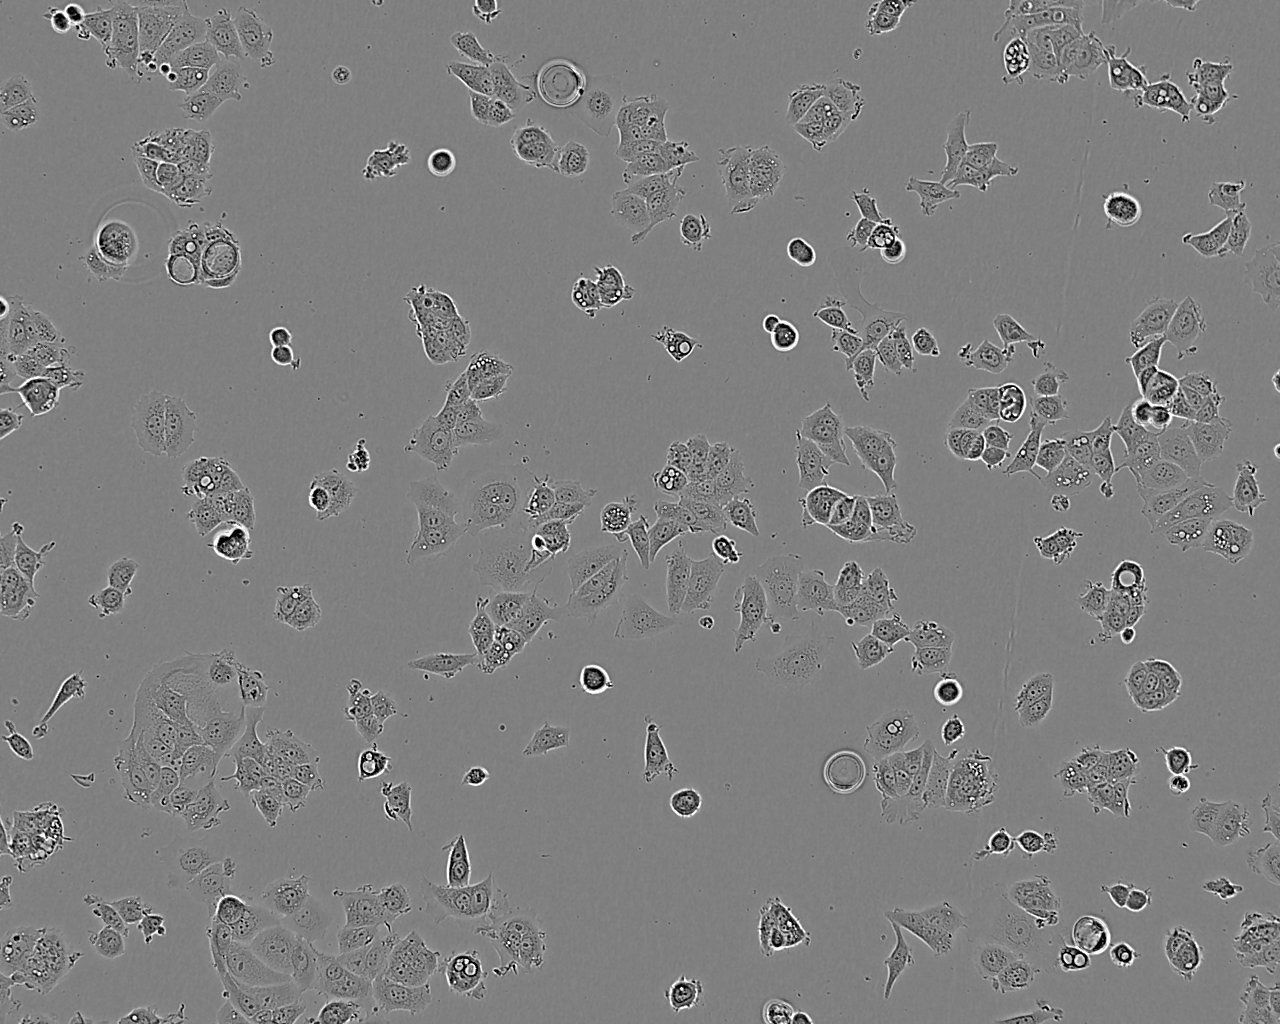 H3396 epithelioid cells人乳腺癌细胞系,H3396 epithelioid cells